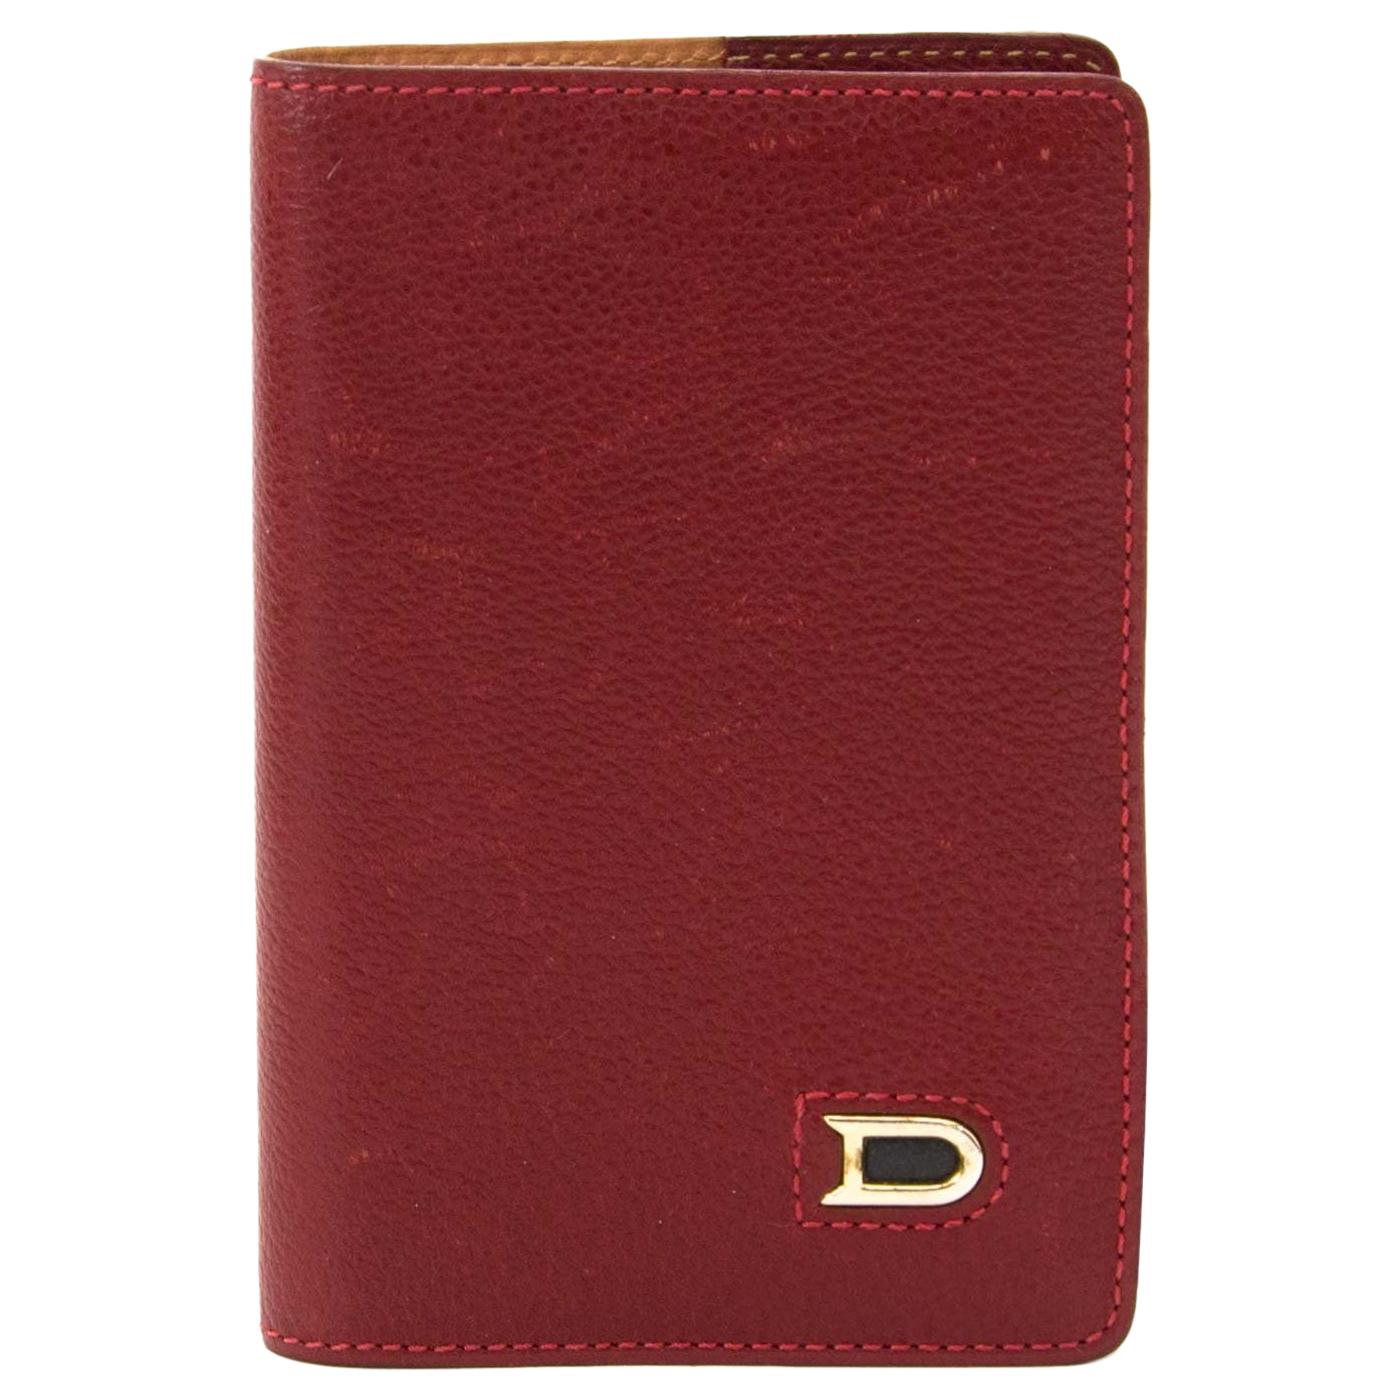 Delvaux Red Leather Passport Holder